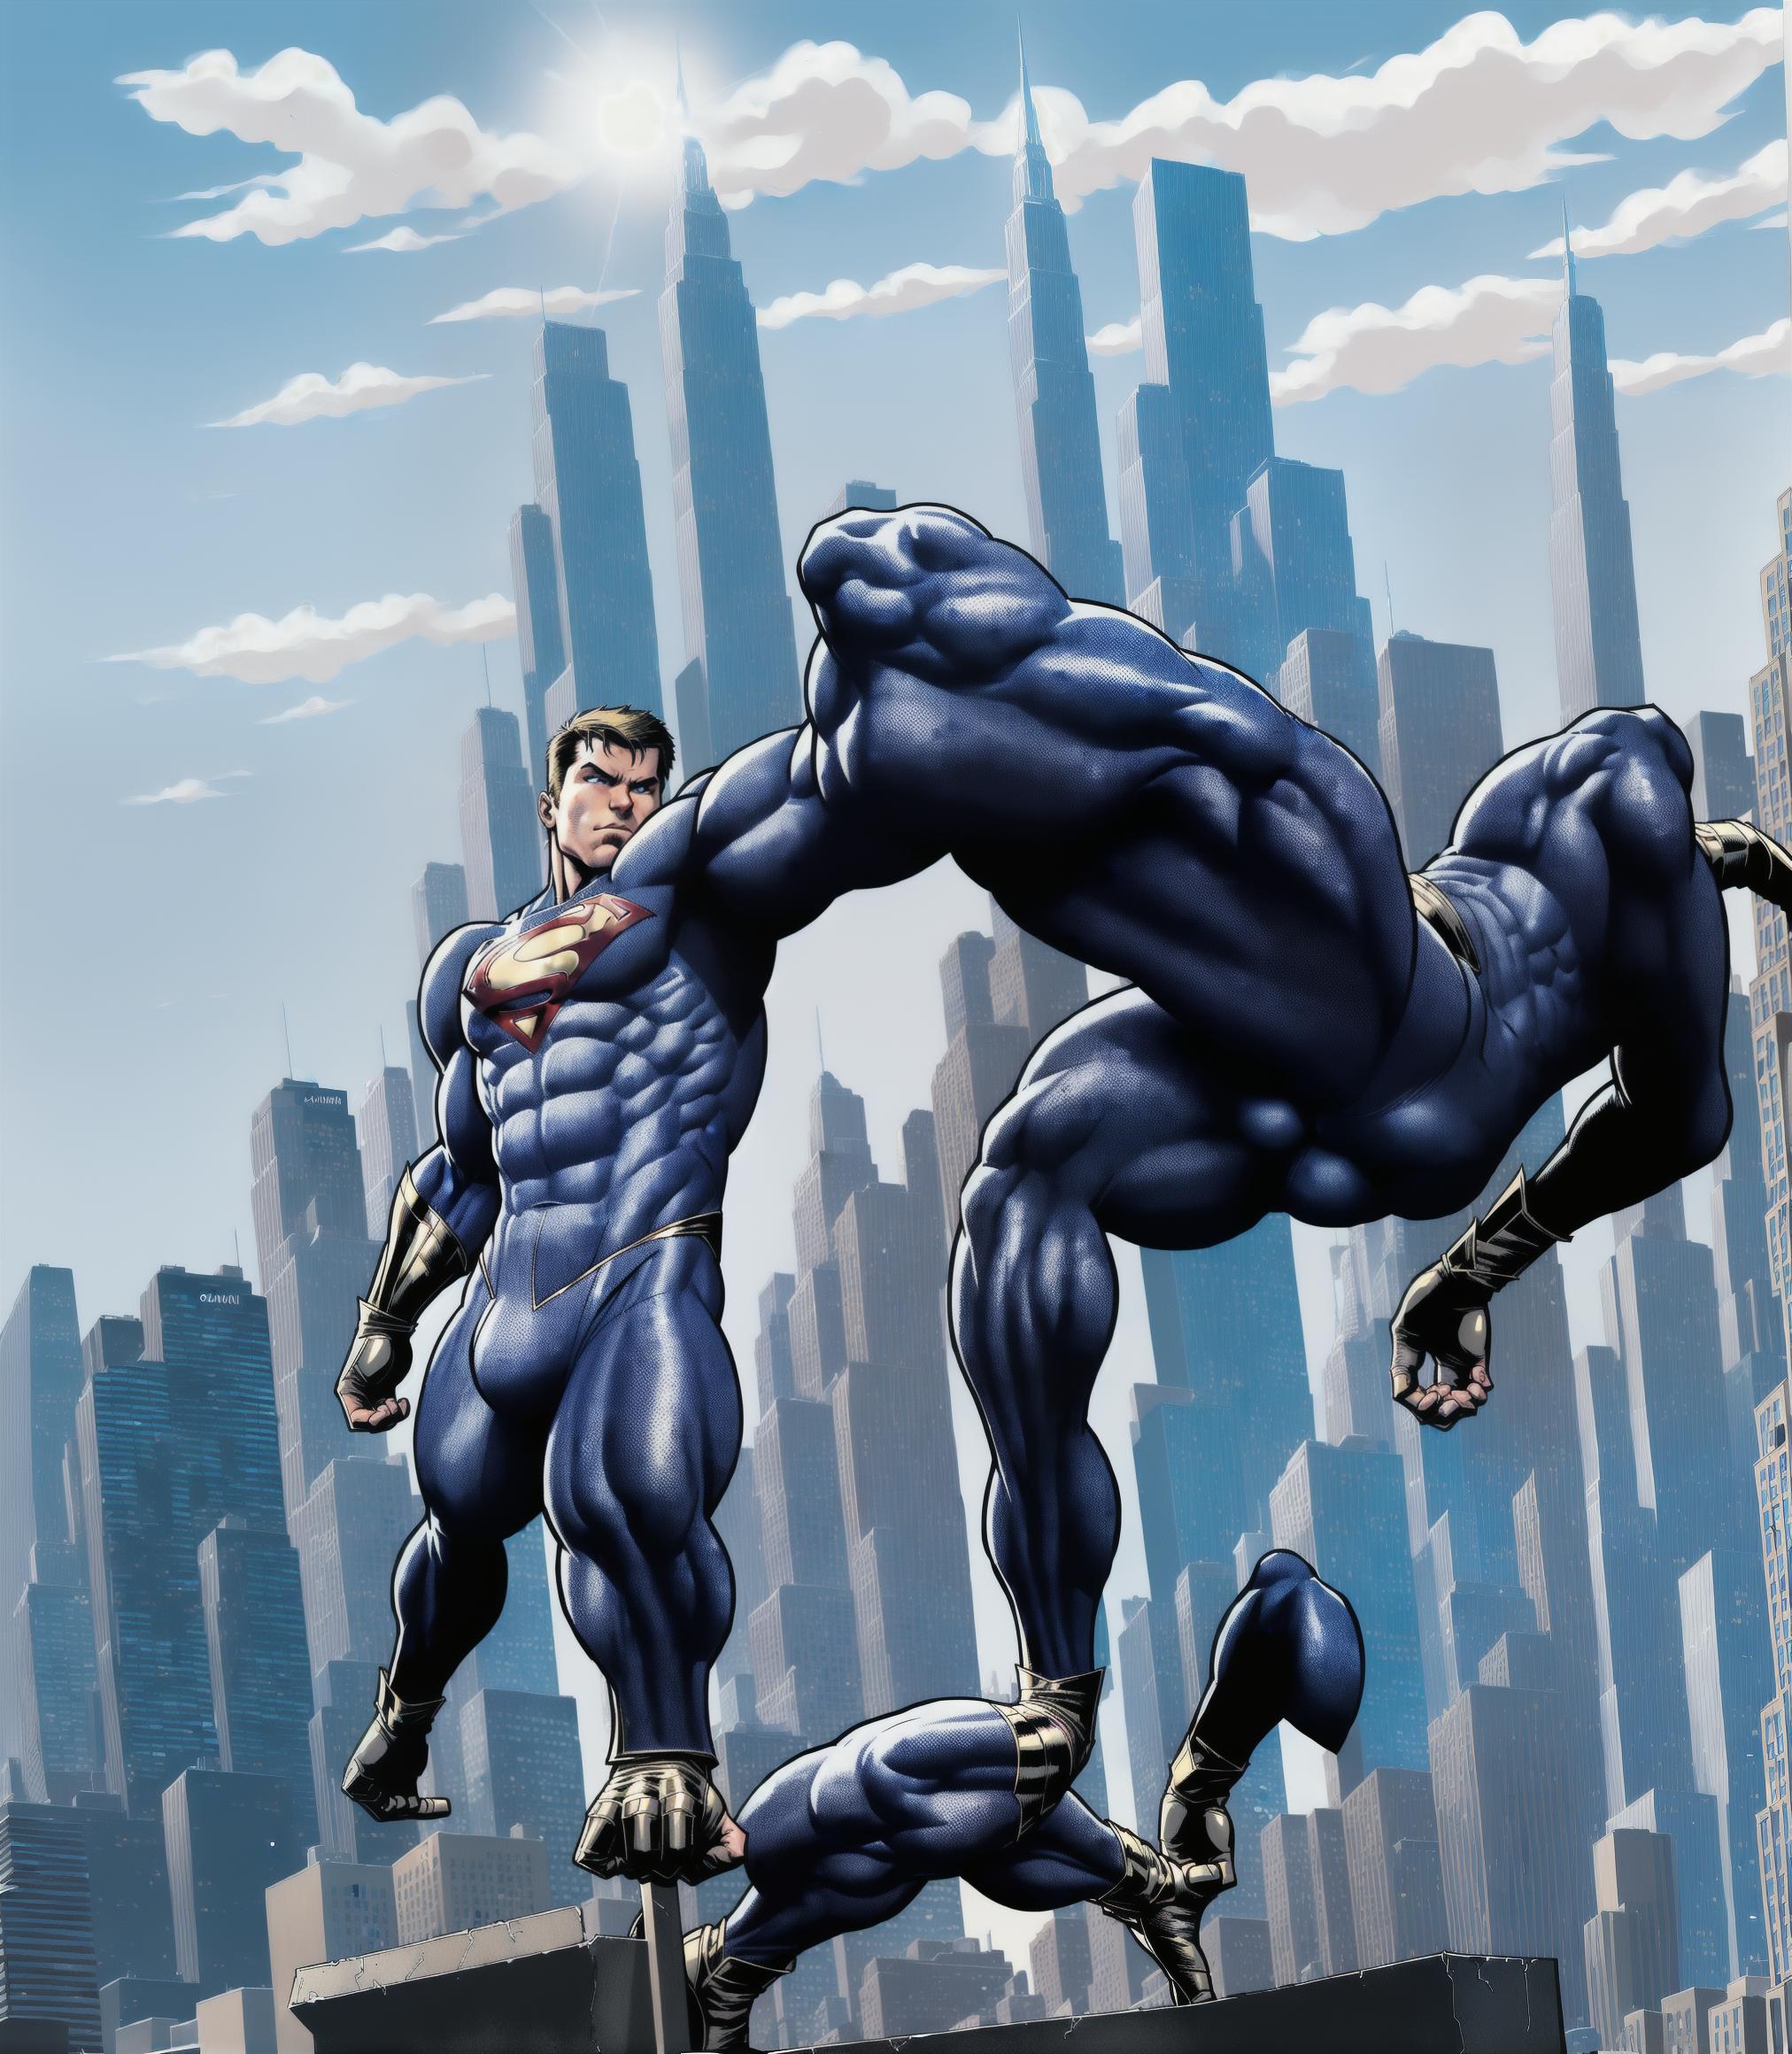  caucasian full body superhero in a city background. Comic book style, highly detailed, sharp details, award winning